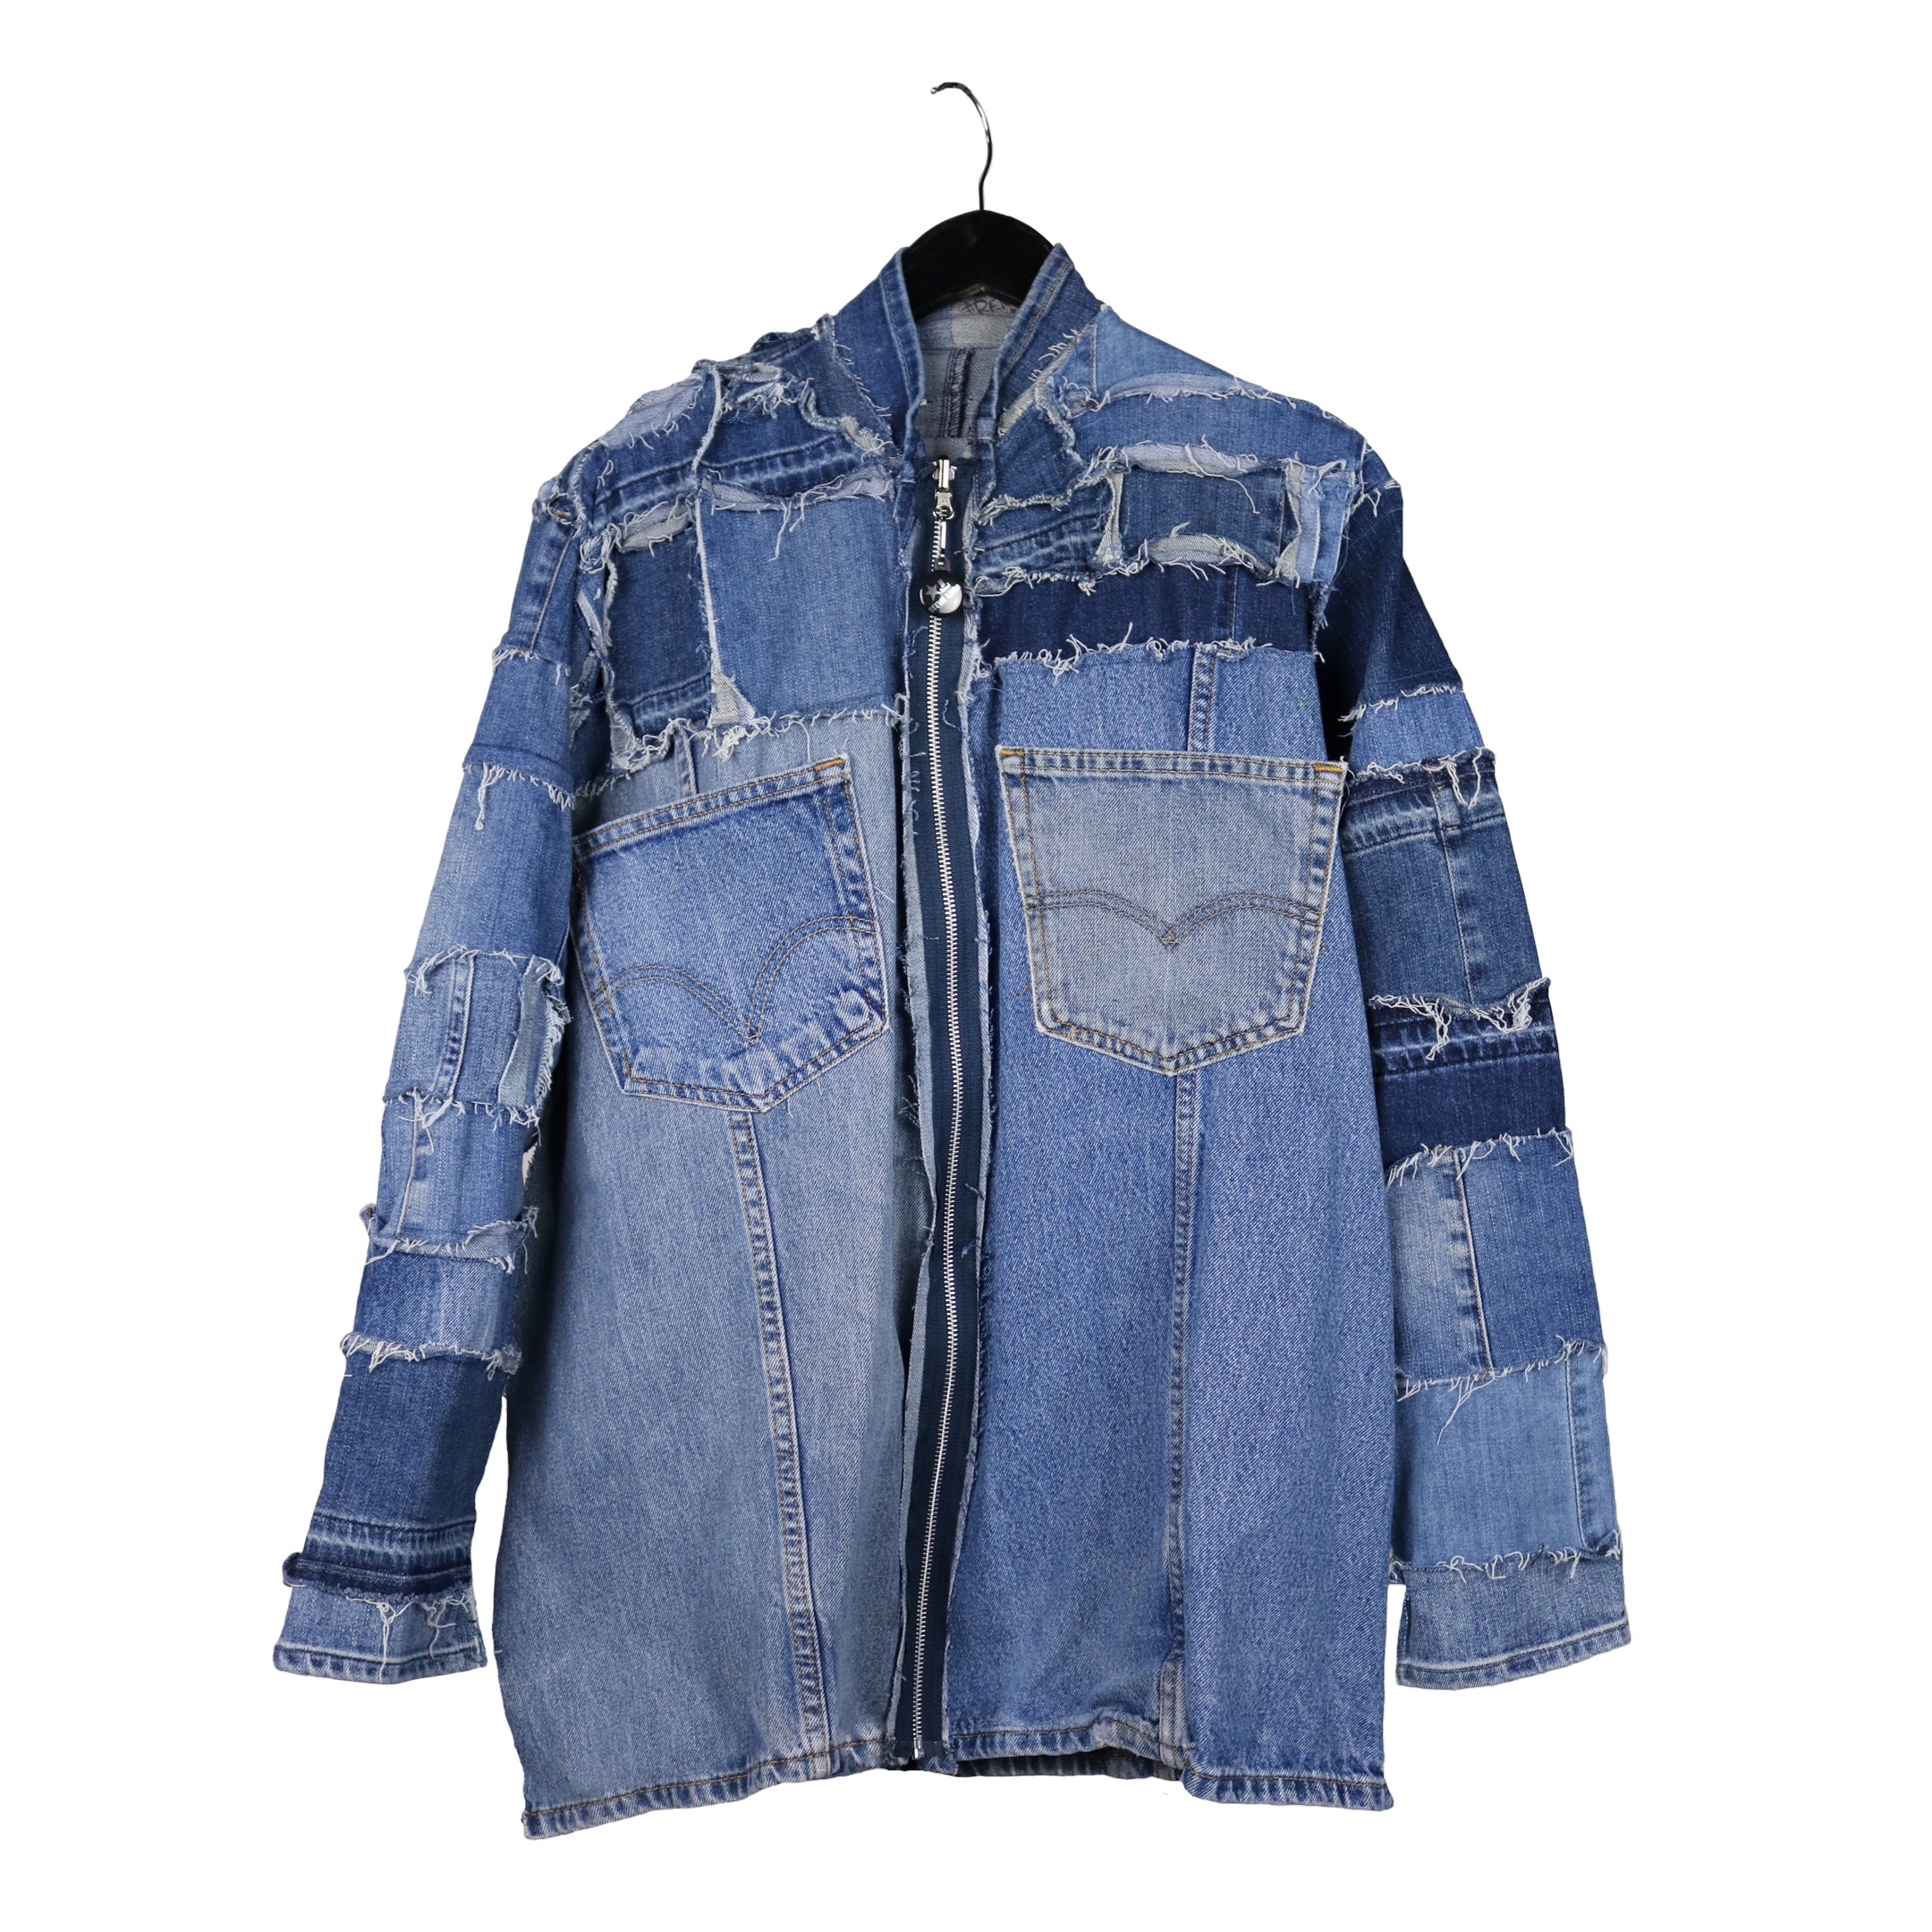 Upcycled Denim Jacket With Patches / Reworked Vintage Oversize -  Israel